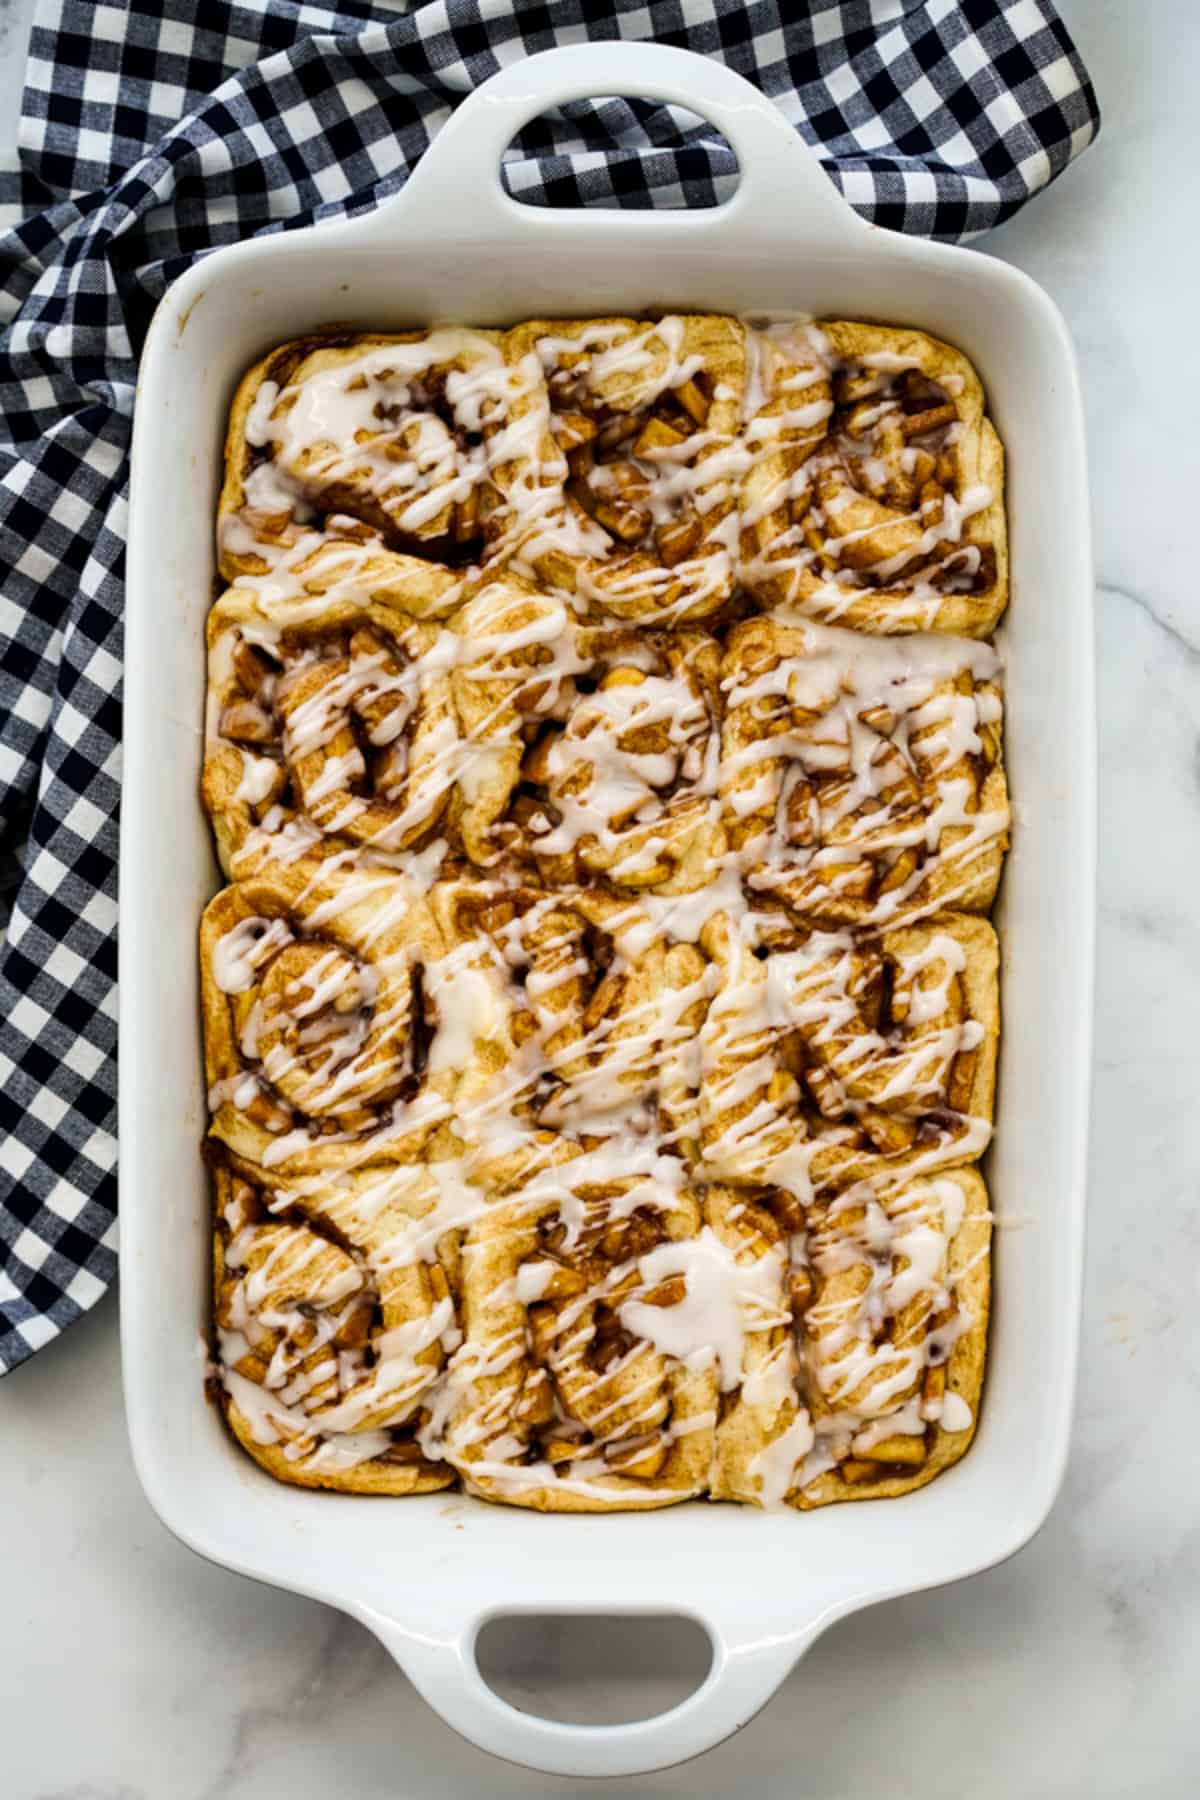 A rectangular casserole of cinnamon rolls filled with apple pie filling and drizzled with sweet glaze